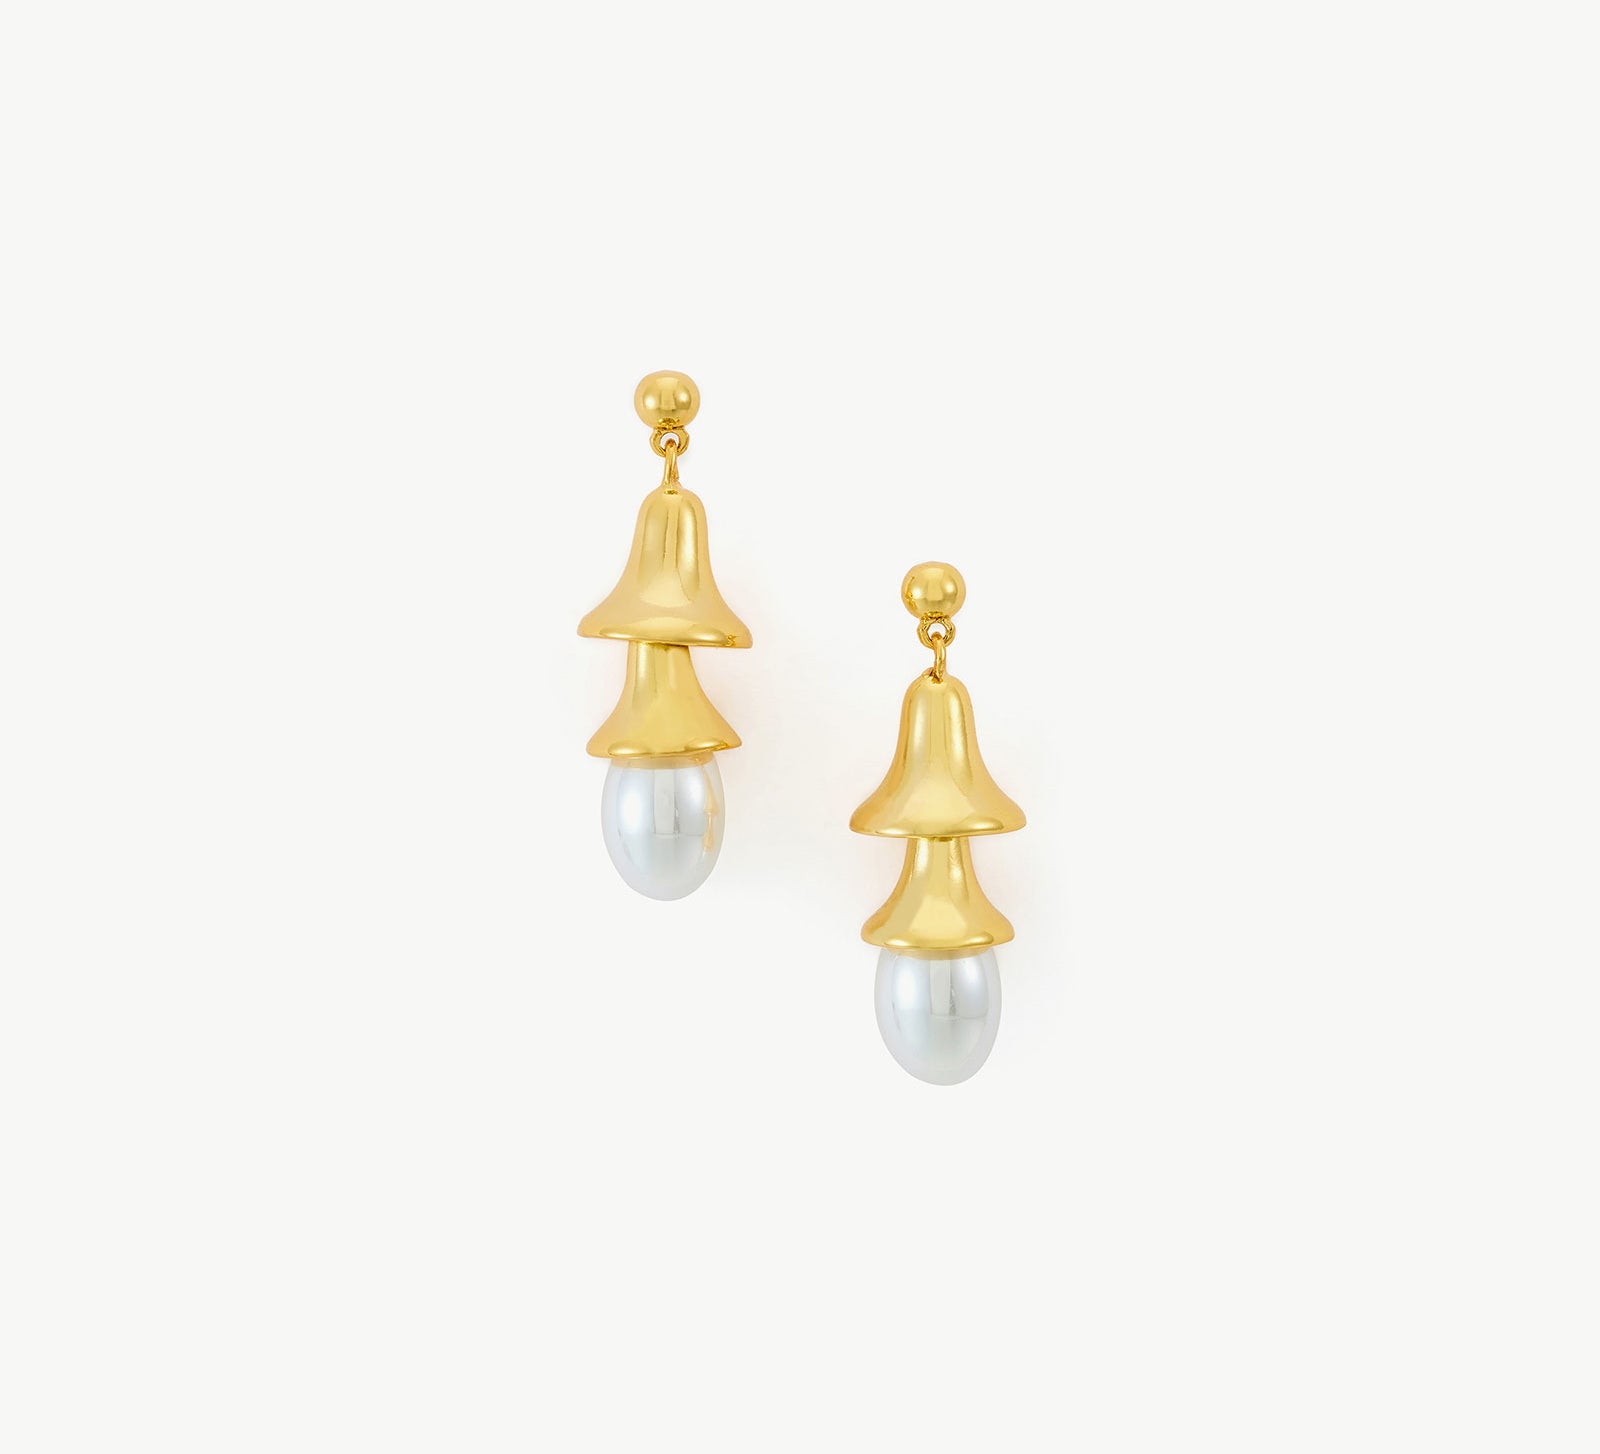 Pearl Drop Earrings in Gold, exuding timeless elegance with lustrous pearls and gold accents, these earrings add a touch of sophistication and grace to your ear ensemble.